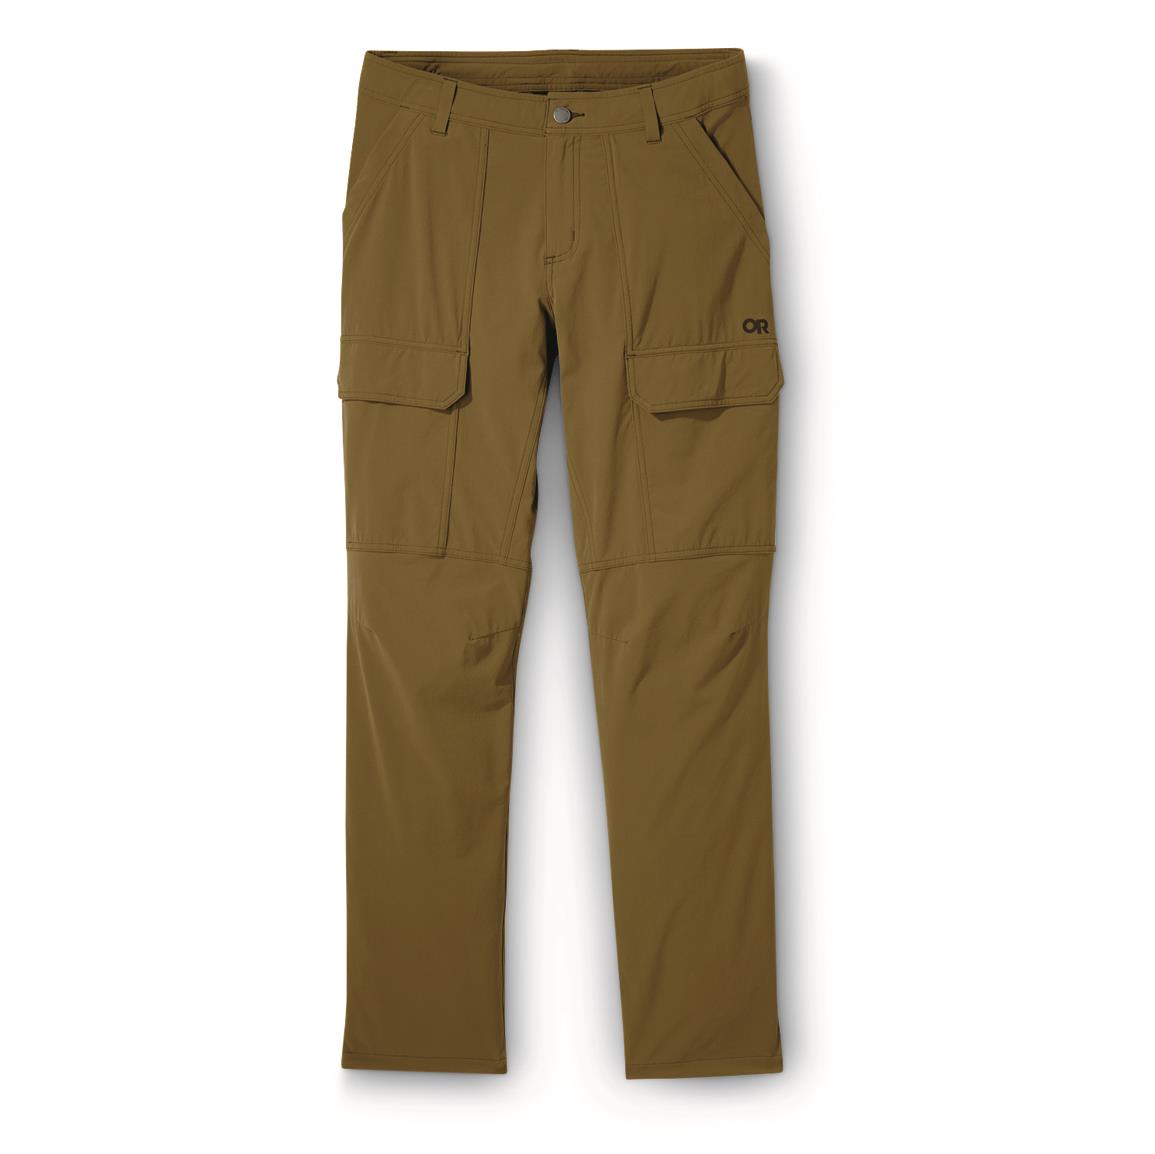 Guide Gear Men's Ripstop Cargo Work Pants - 621473, Jeans & Pants at  Sportsman's Guide